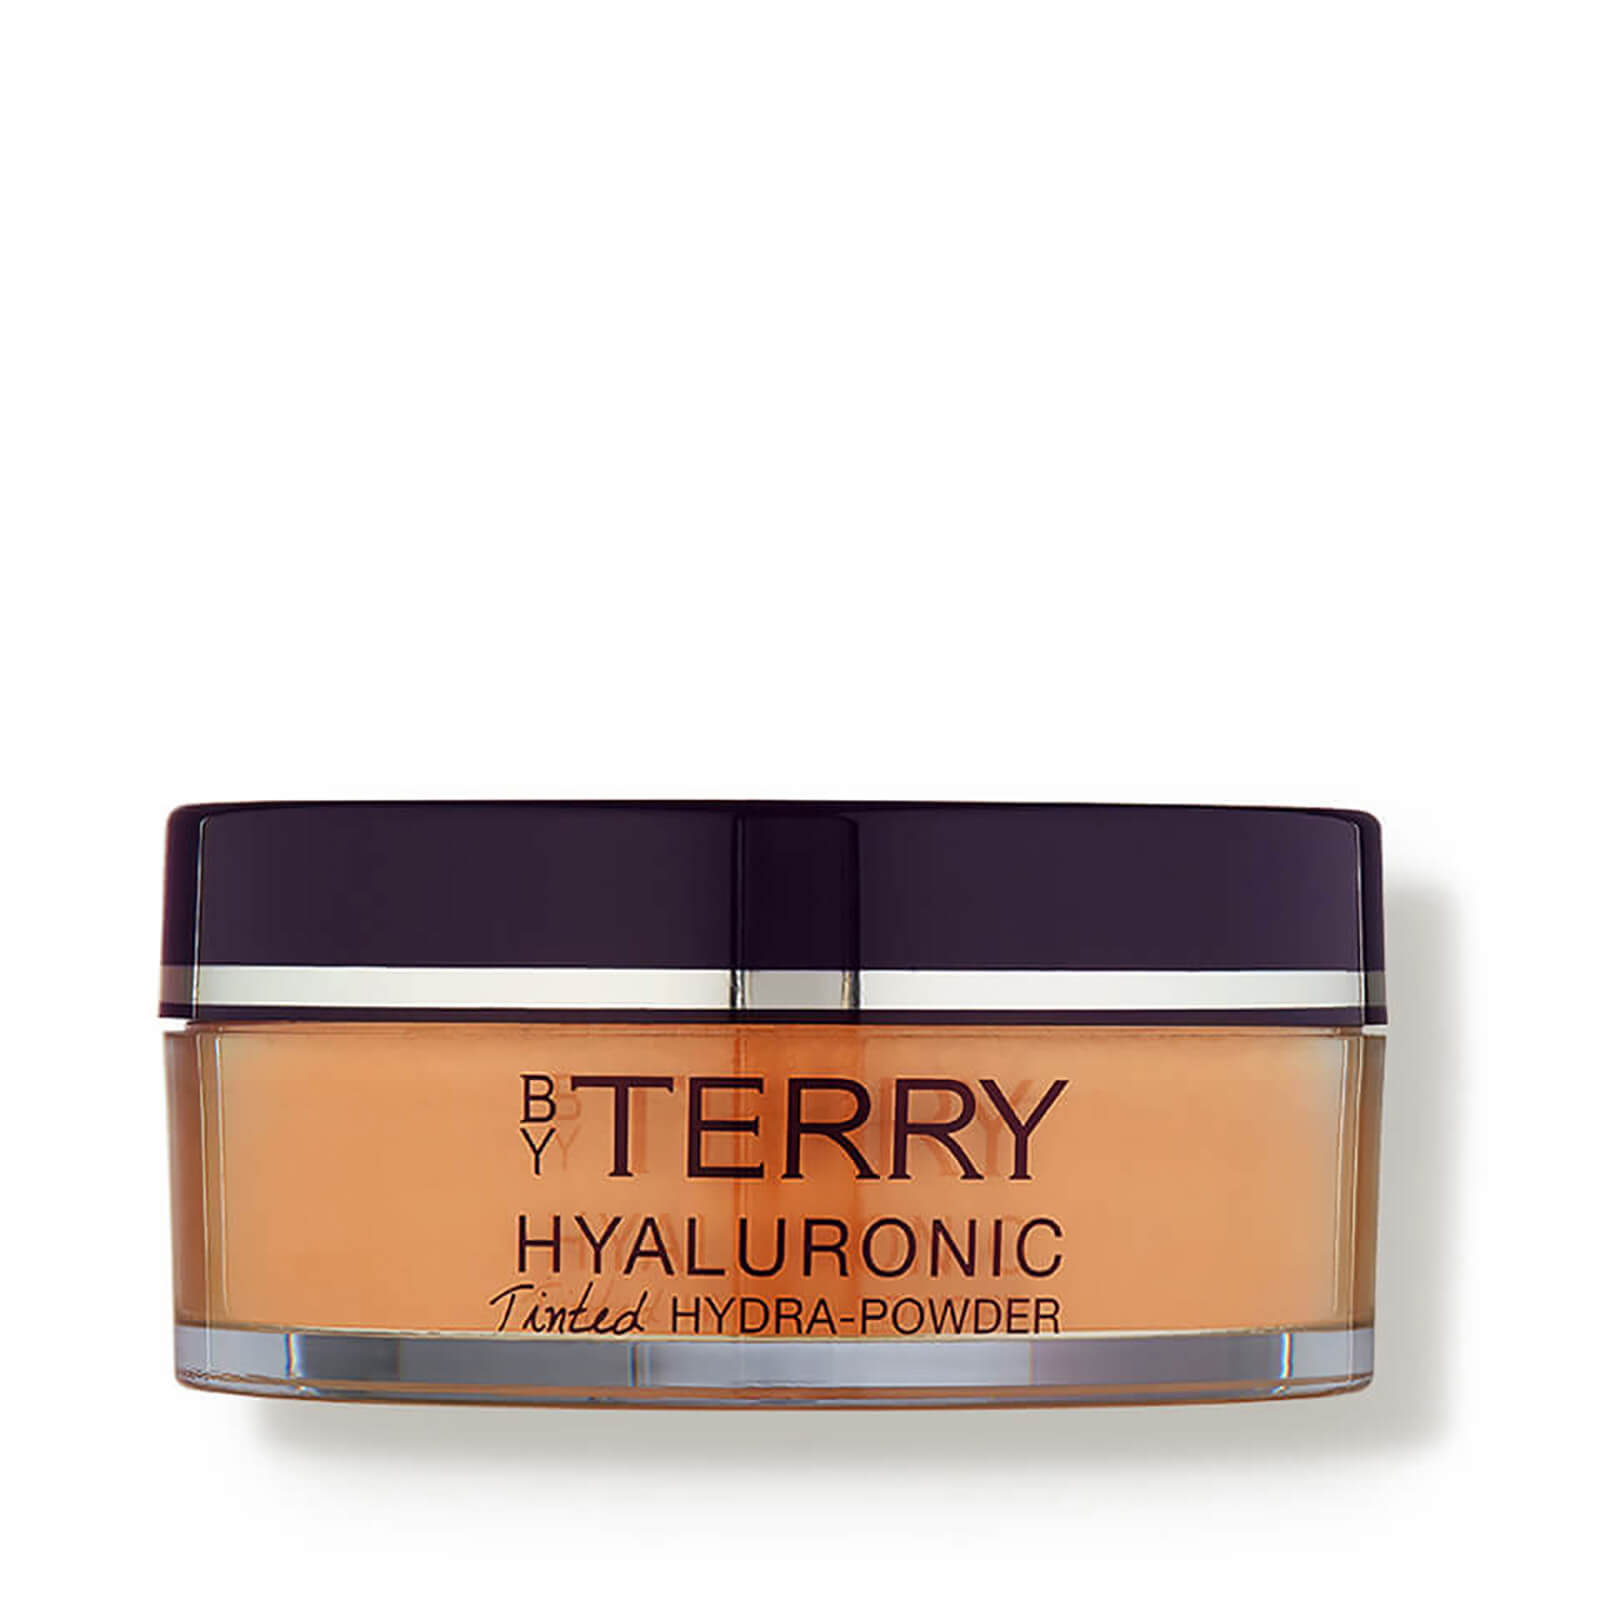 By Terry Hyaluronic Tinted Hydra-Powder 10g (Various Shades) - 2 N400. Medium